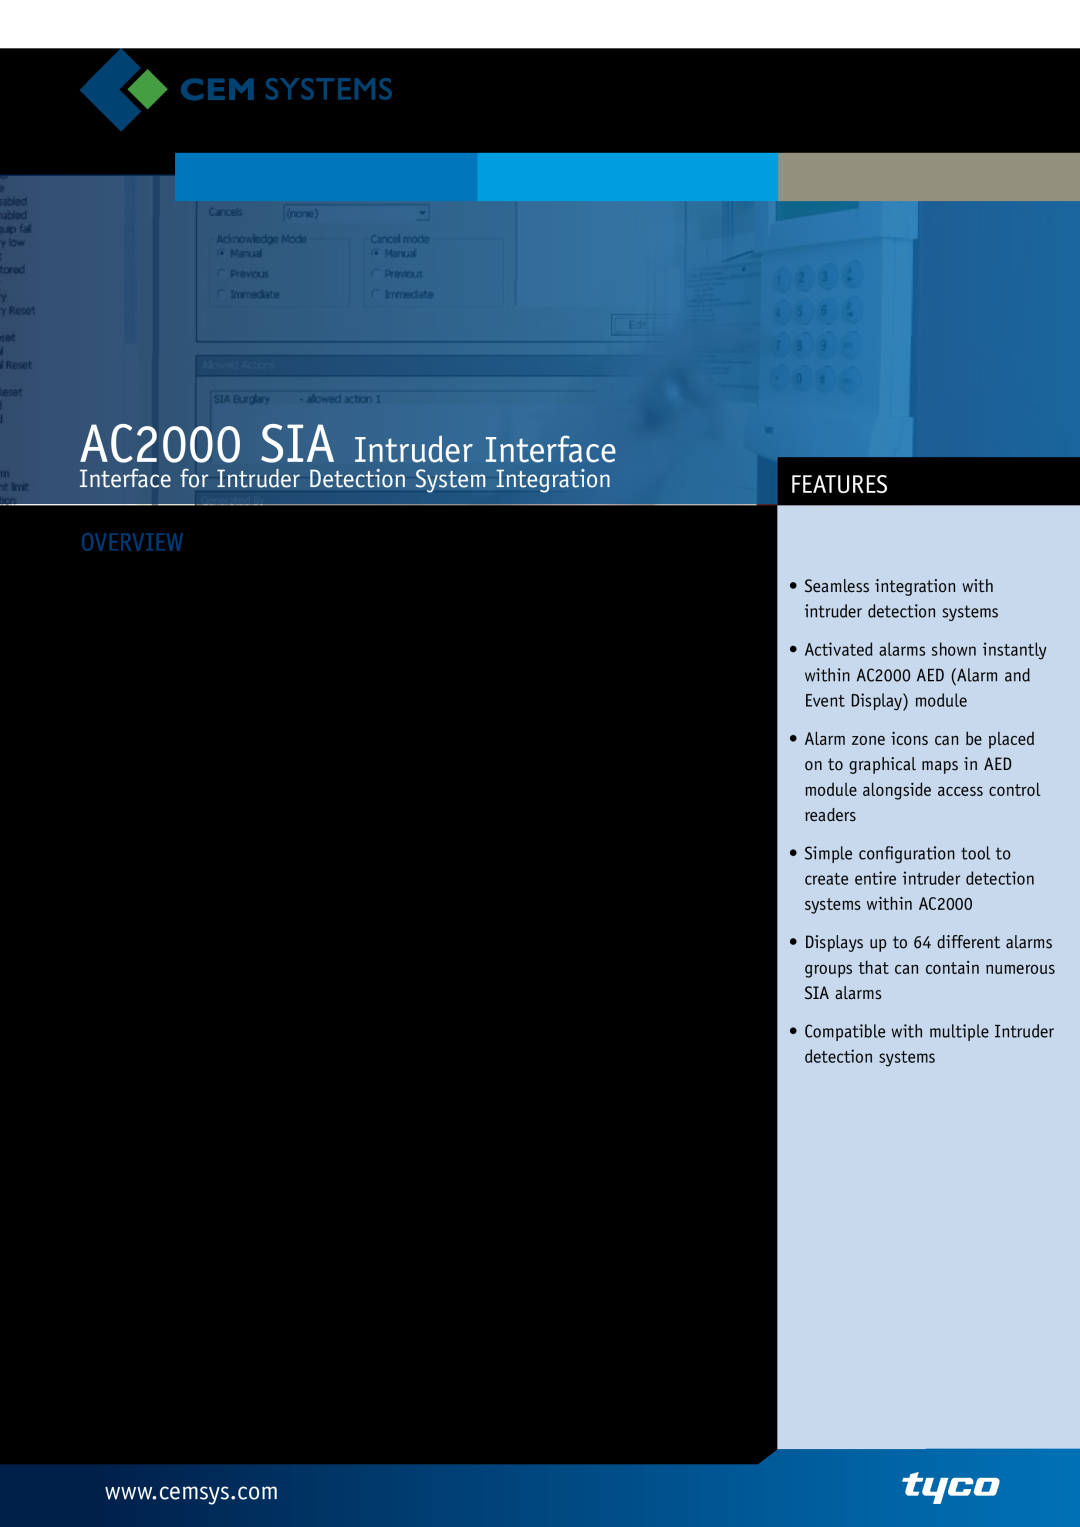 Tyco manual Interface for Intruder Detection System Integration, Features, AC2000 SIA Intruder Interface, Overview 